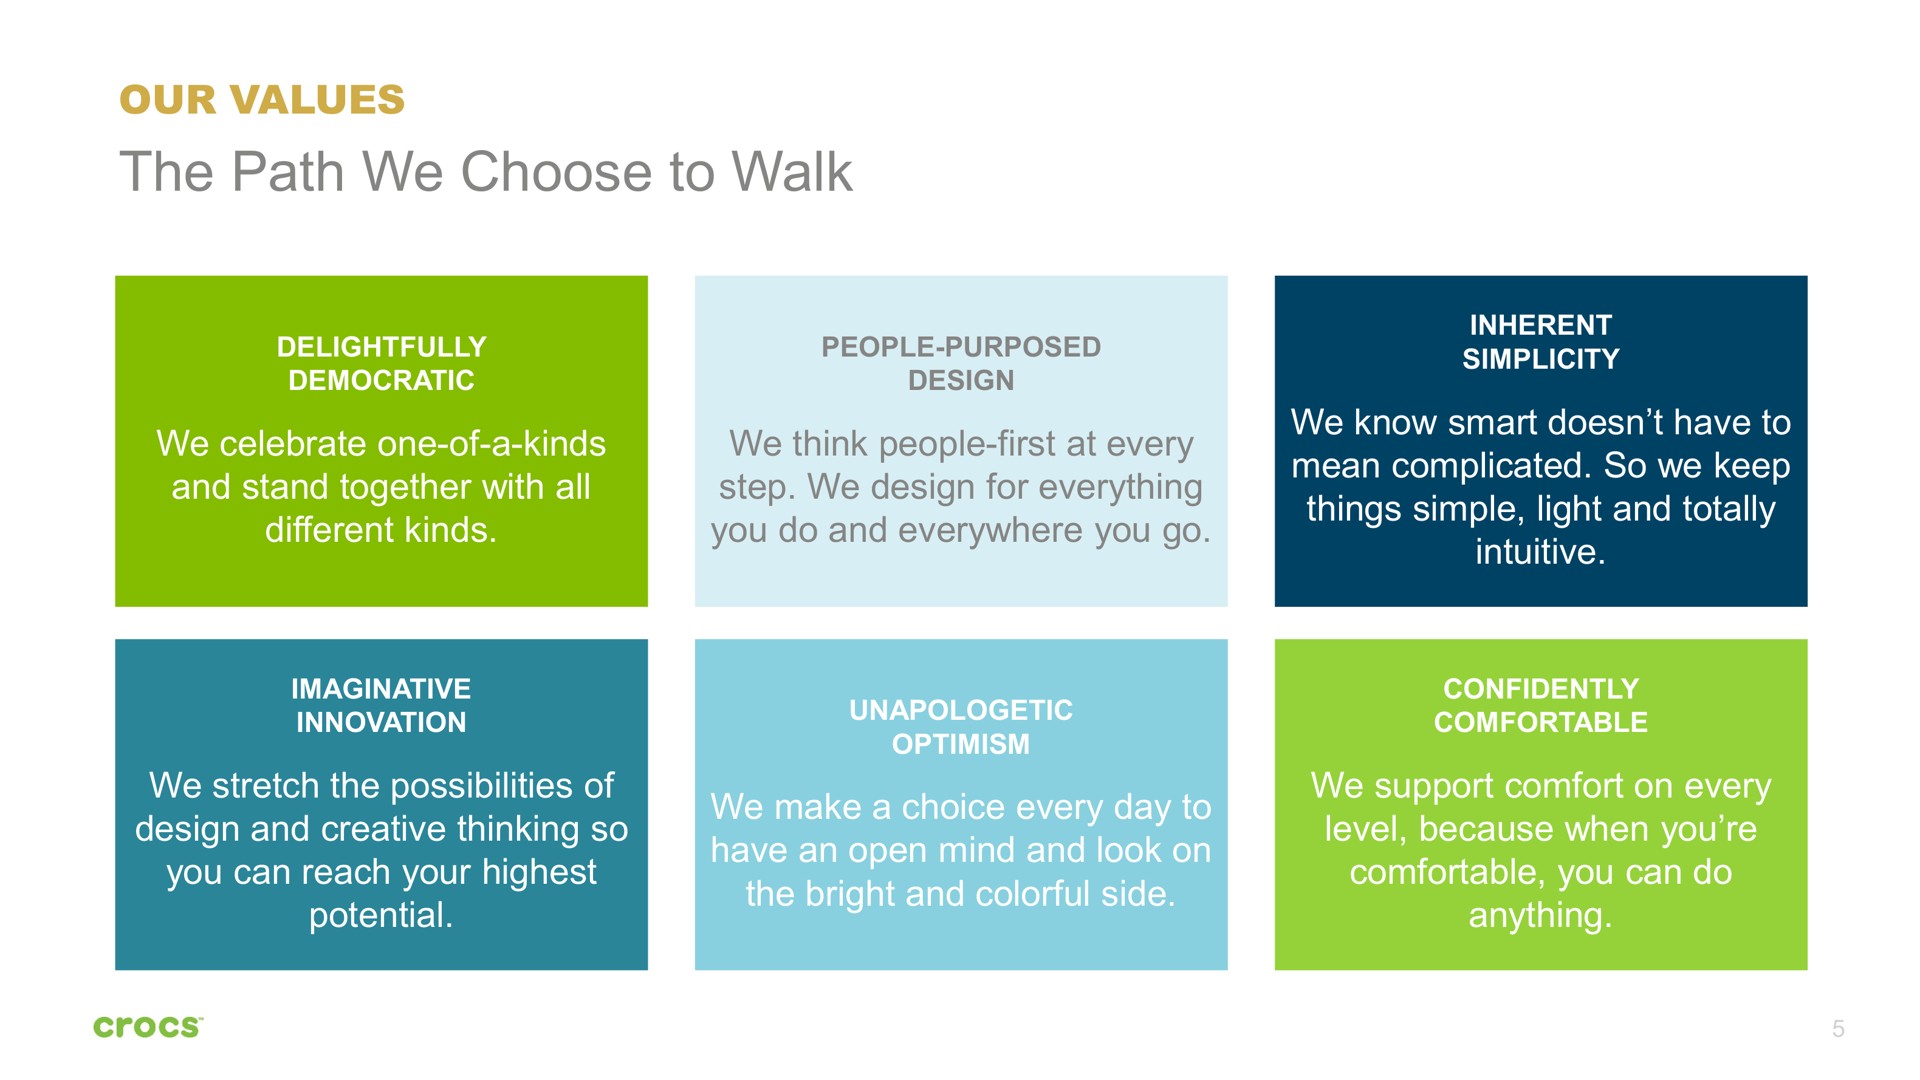 our values the path we choose to walk step design for everything bright and colorful side make a choice every day anything level because when you comfortable you can do | Crocs